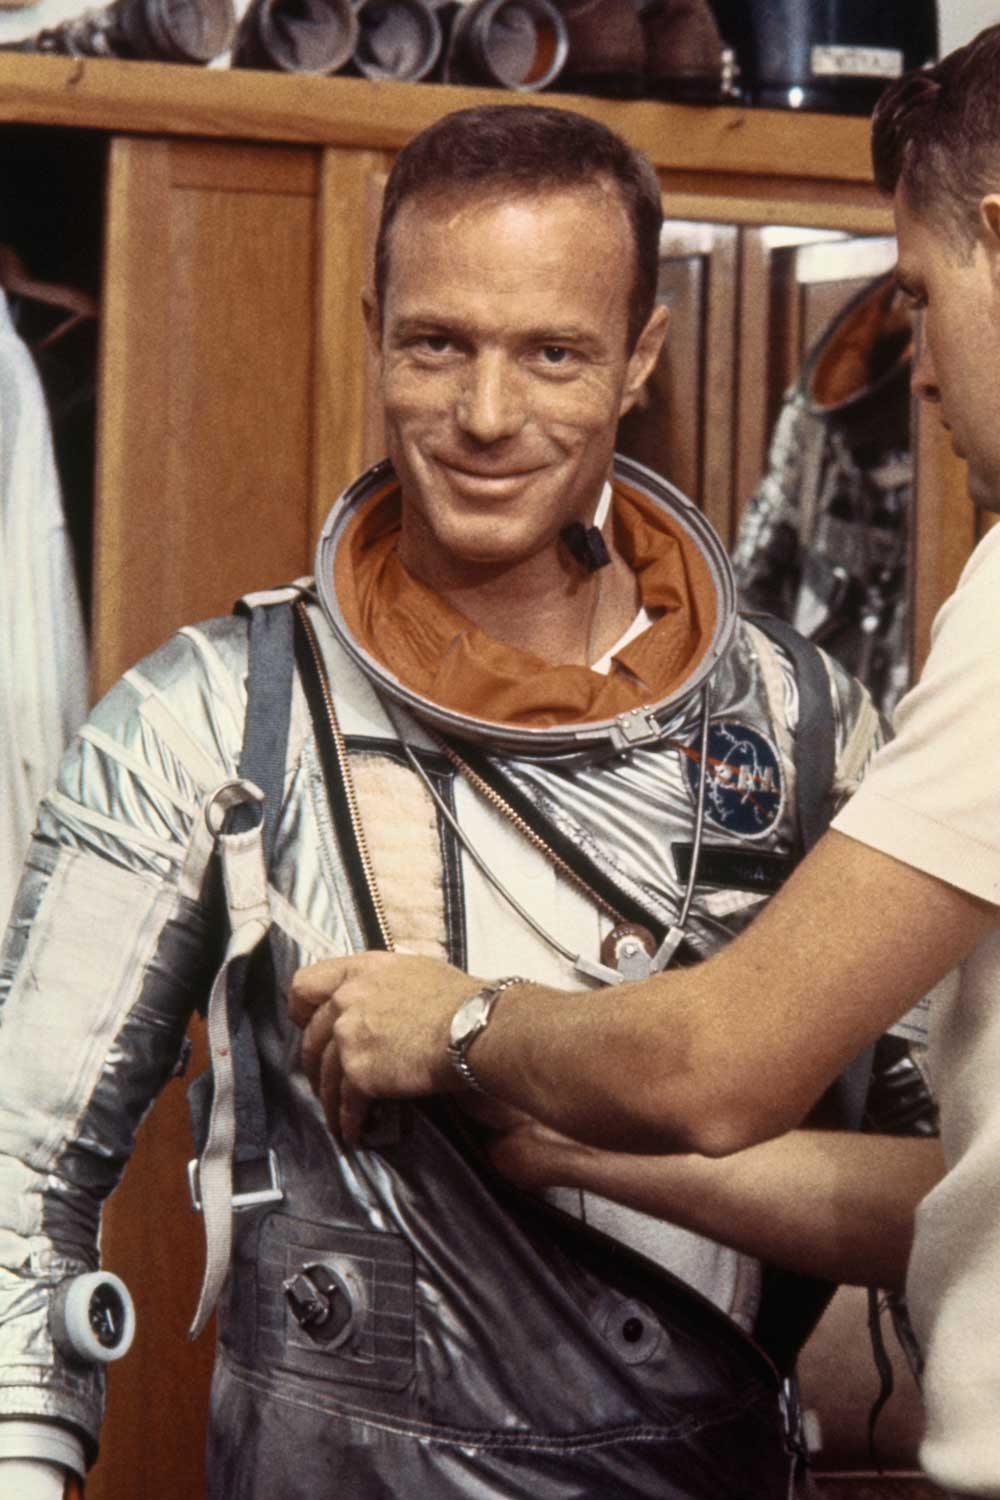 Scott Carpenter dons the Project Mercury suit he will wear on his MA-7 orbital flight (Image: GettyImages)